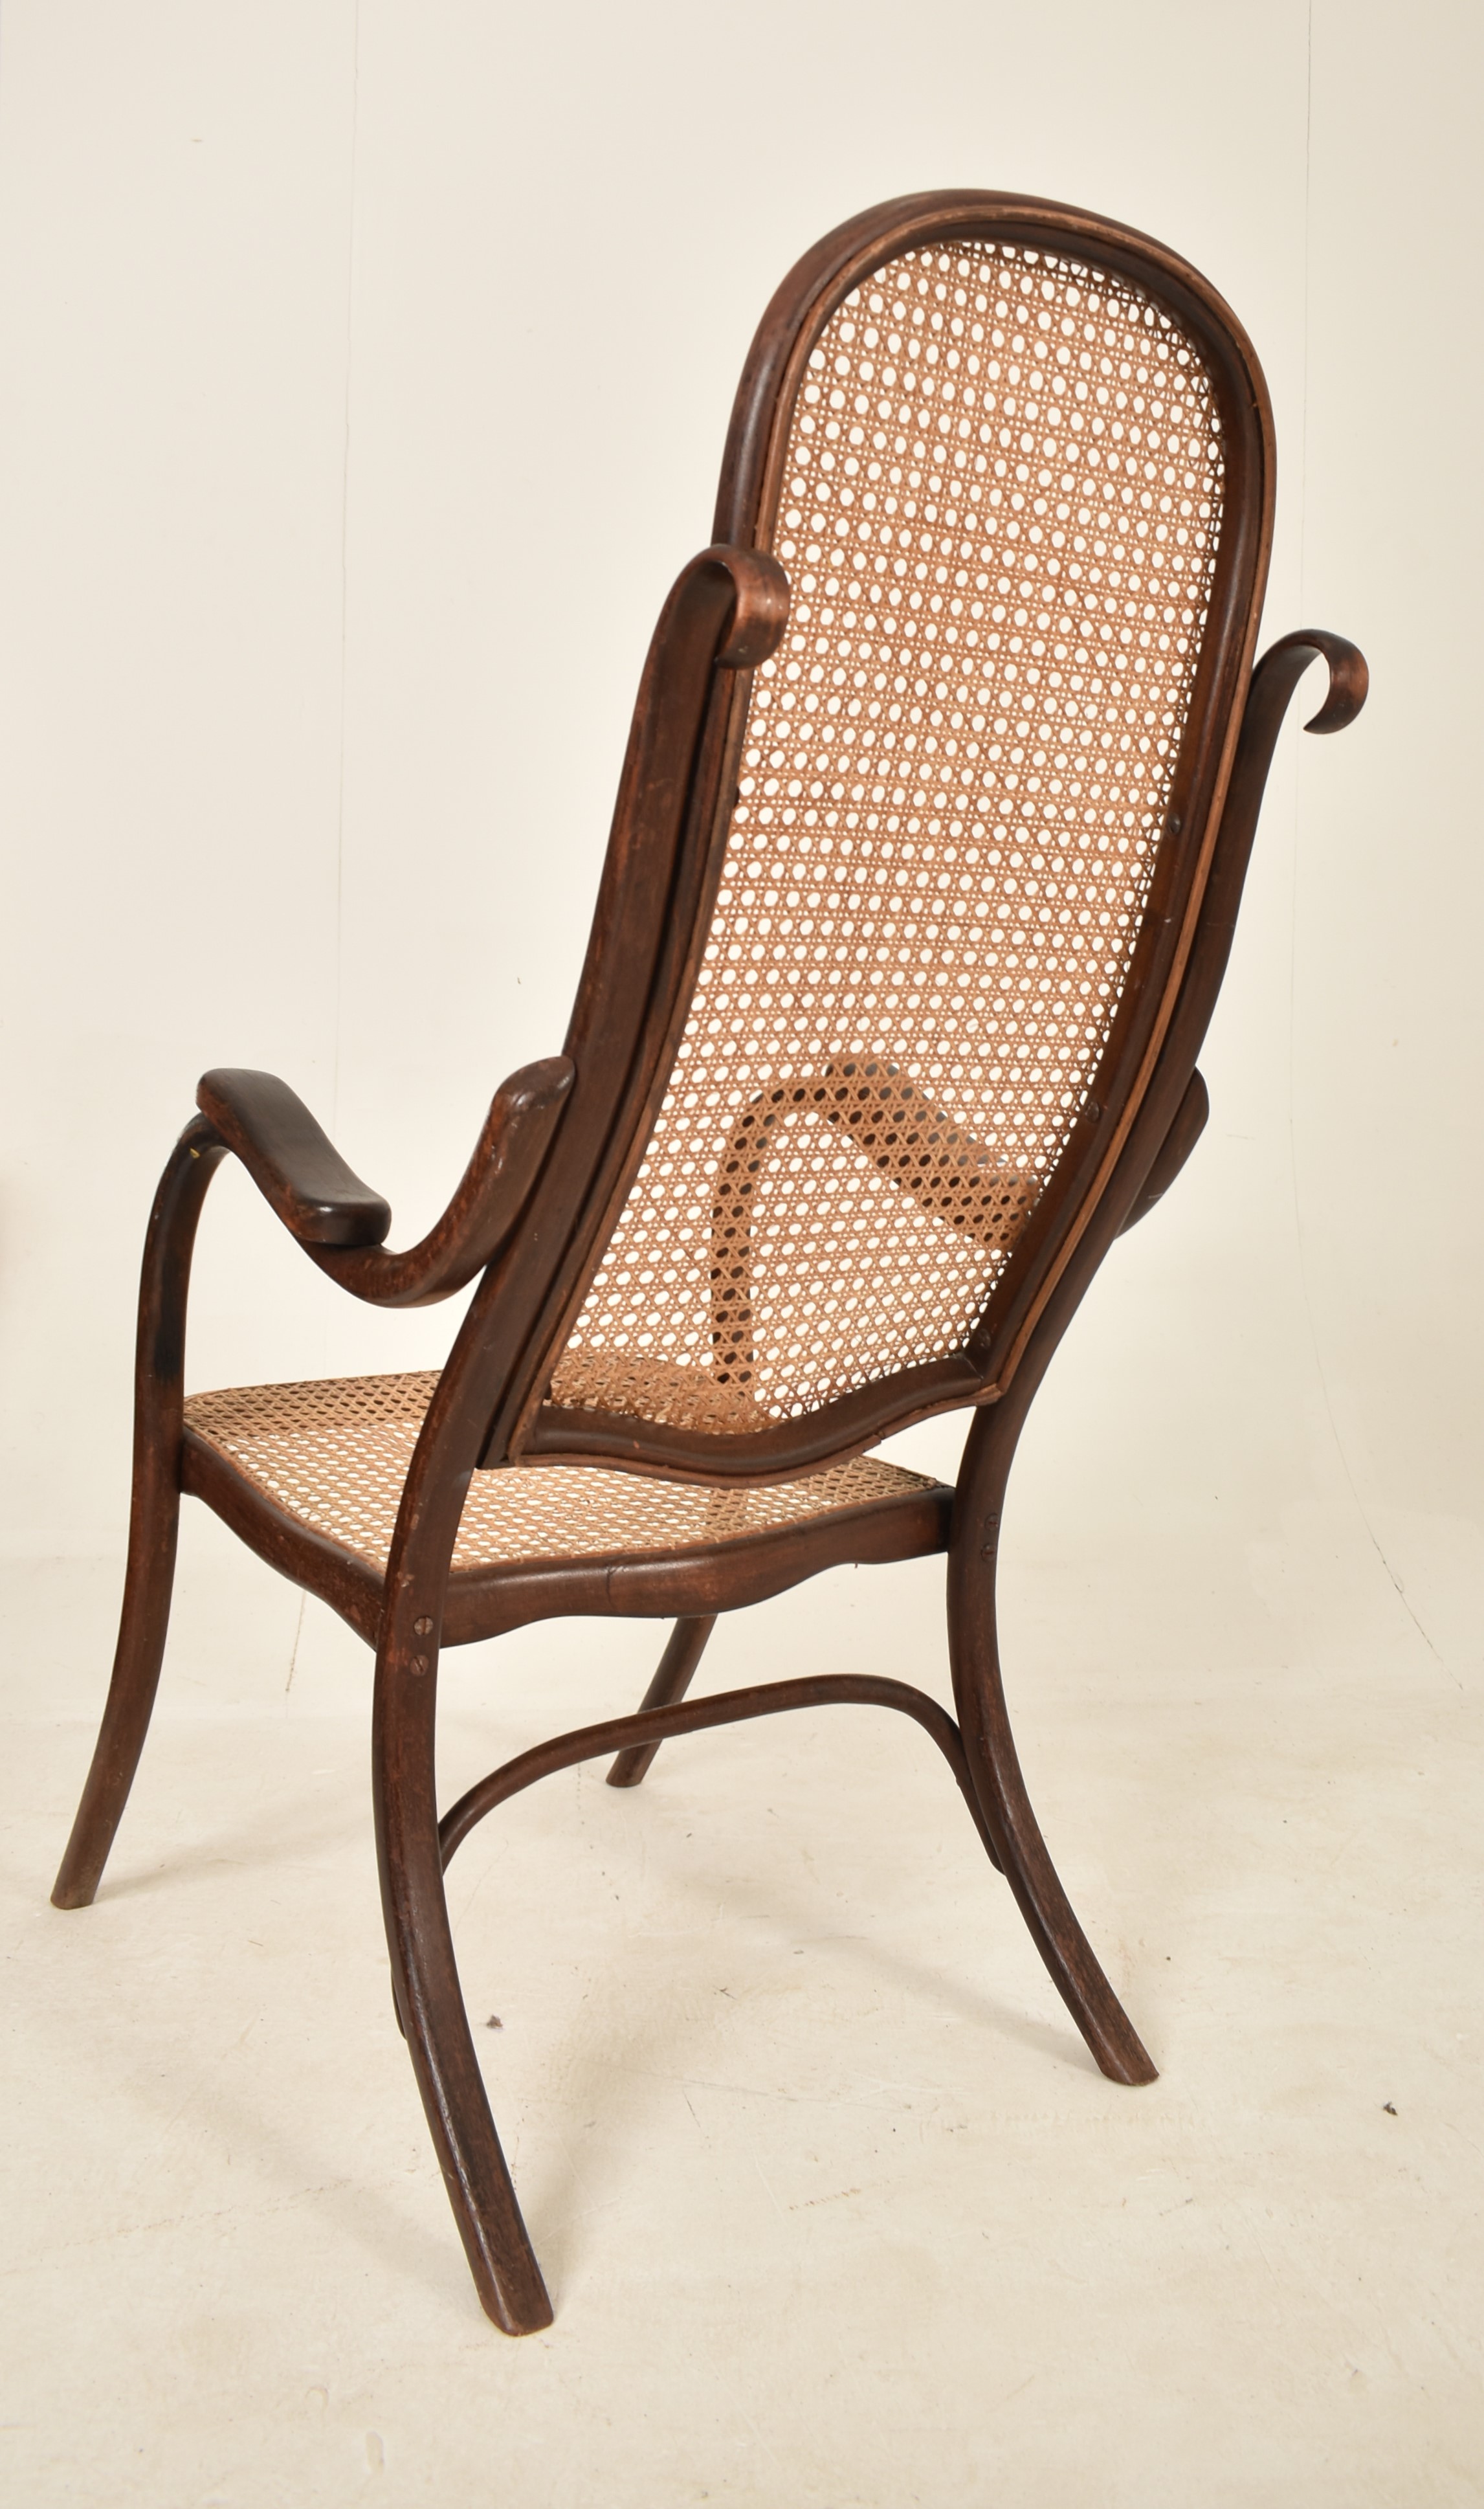 THONET - EARLY 20TH CENTURY BENTWOOD & CANE FIRESIDE ARMCHAIR - Image 7 of 7